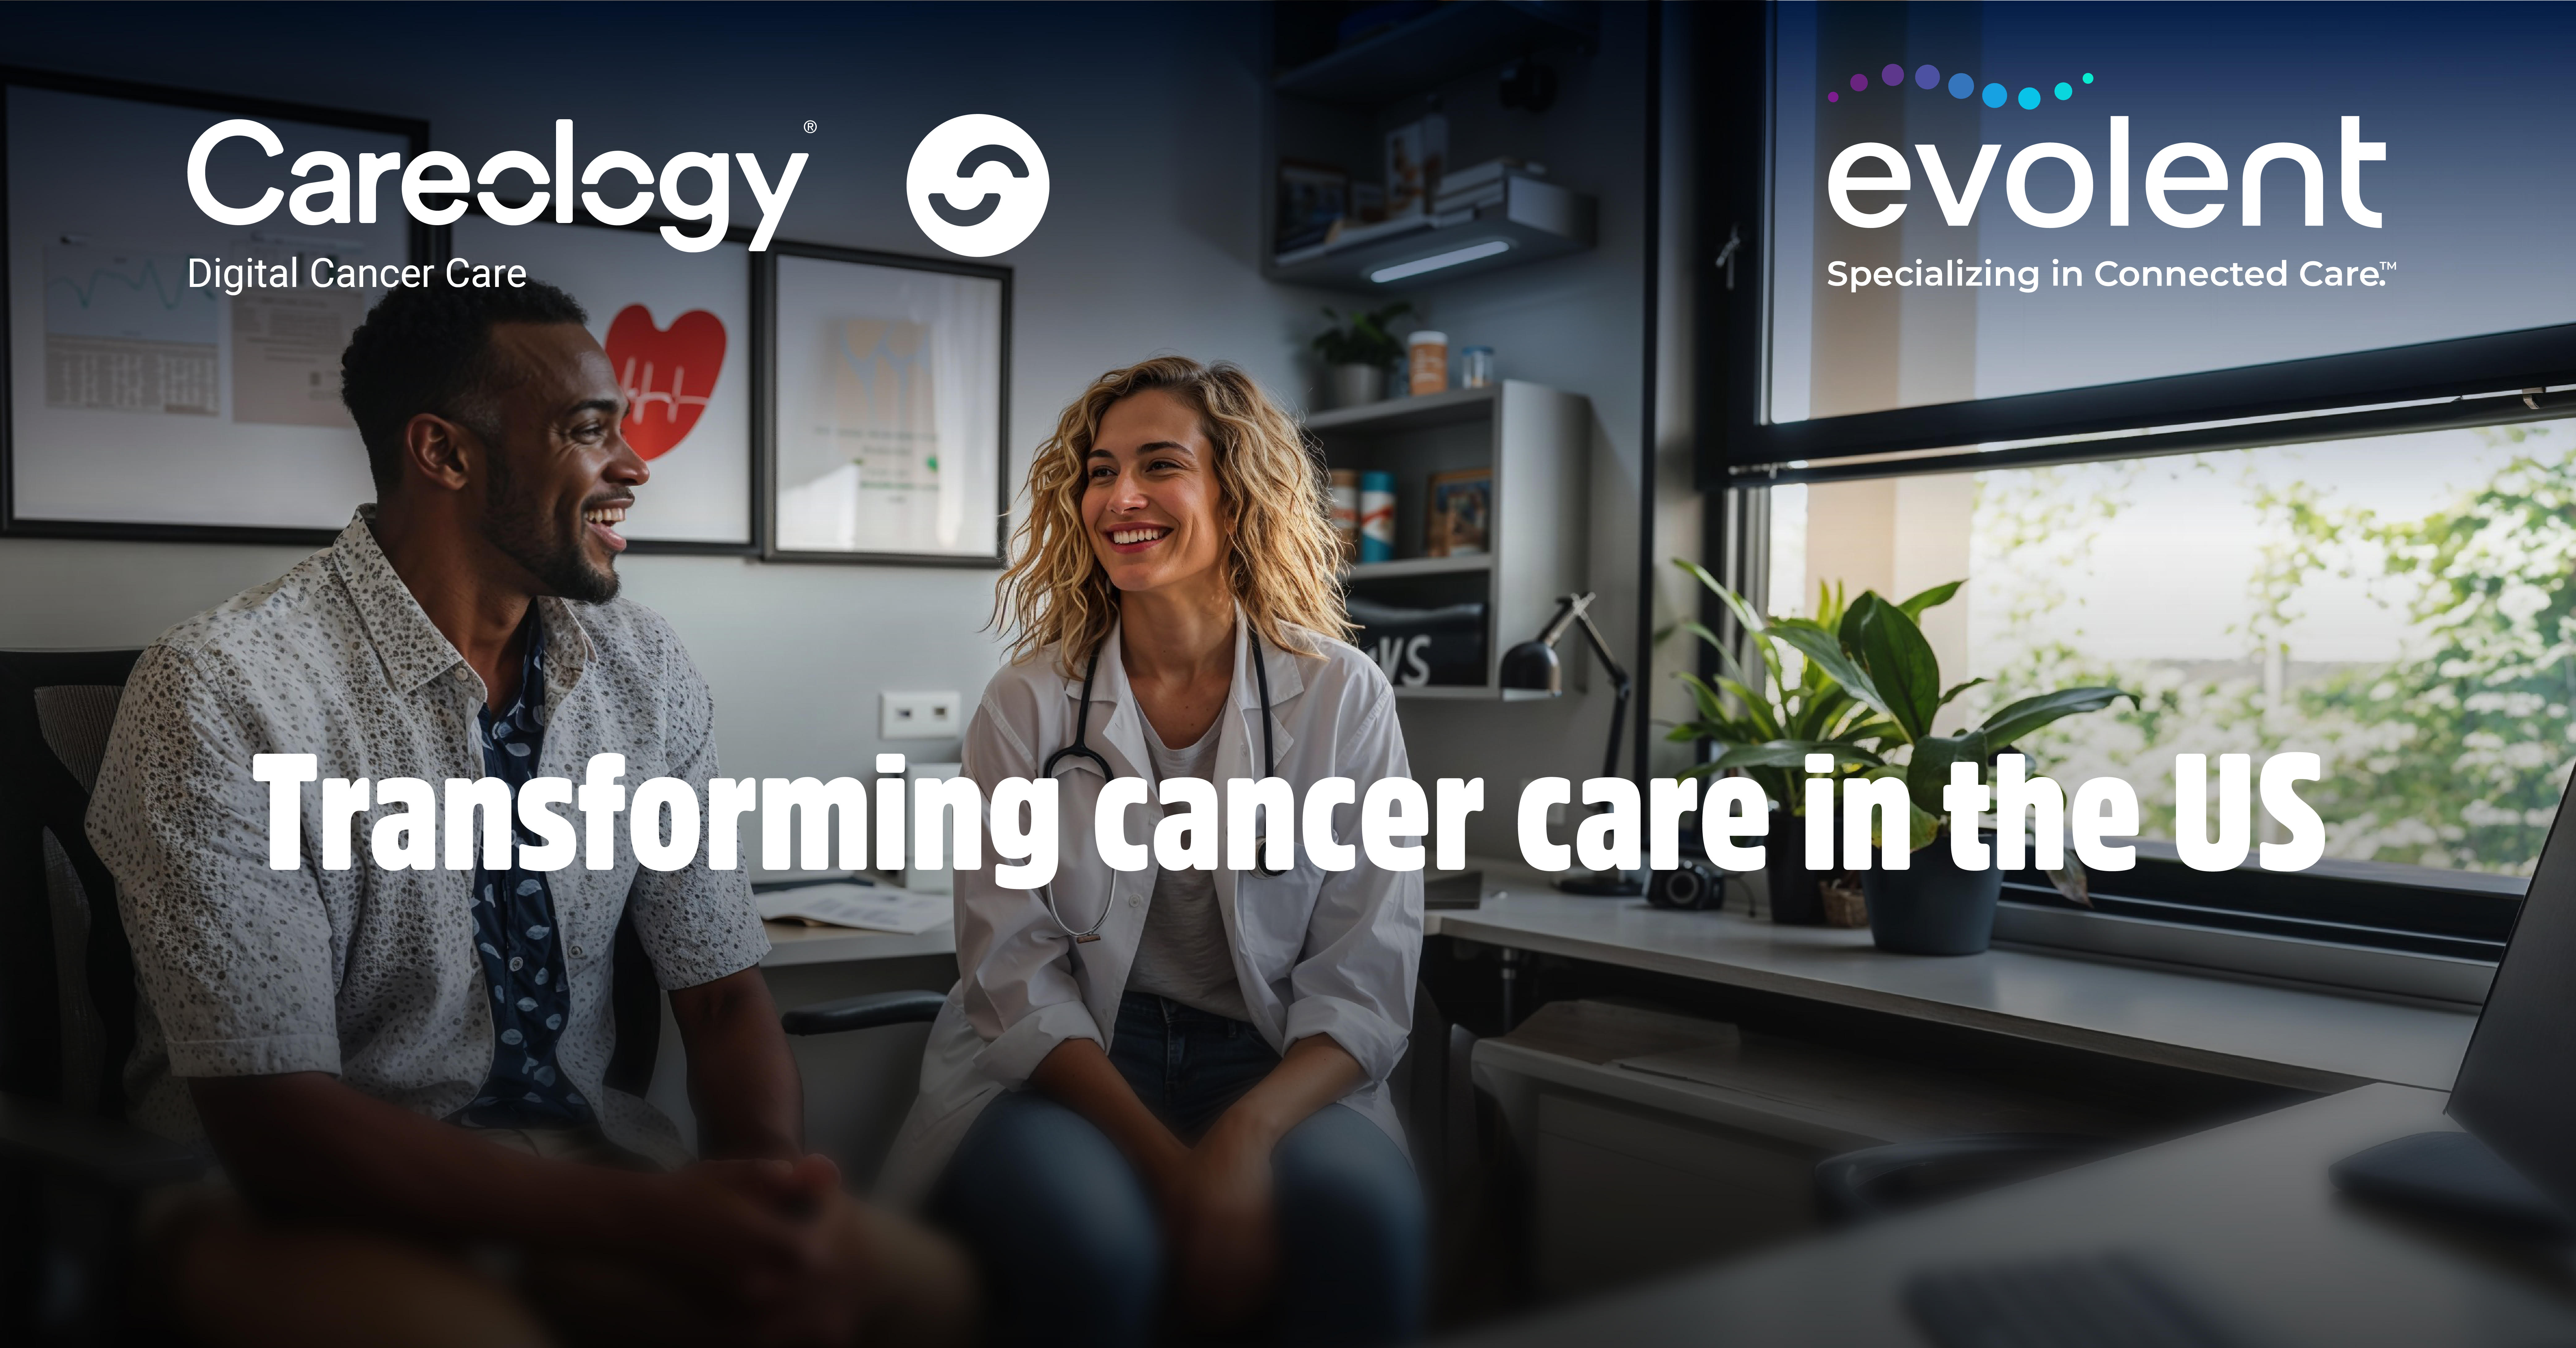 Evolent and Careology join forces to transform cancer care in the US